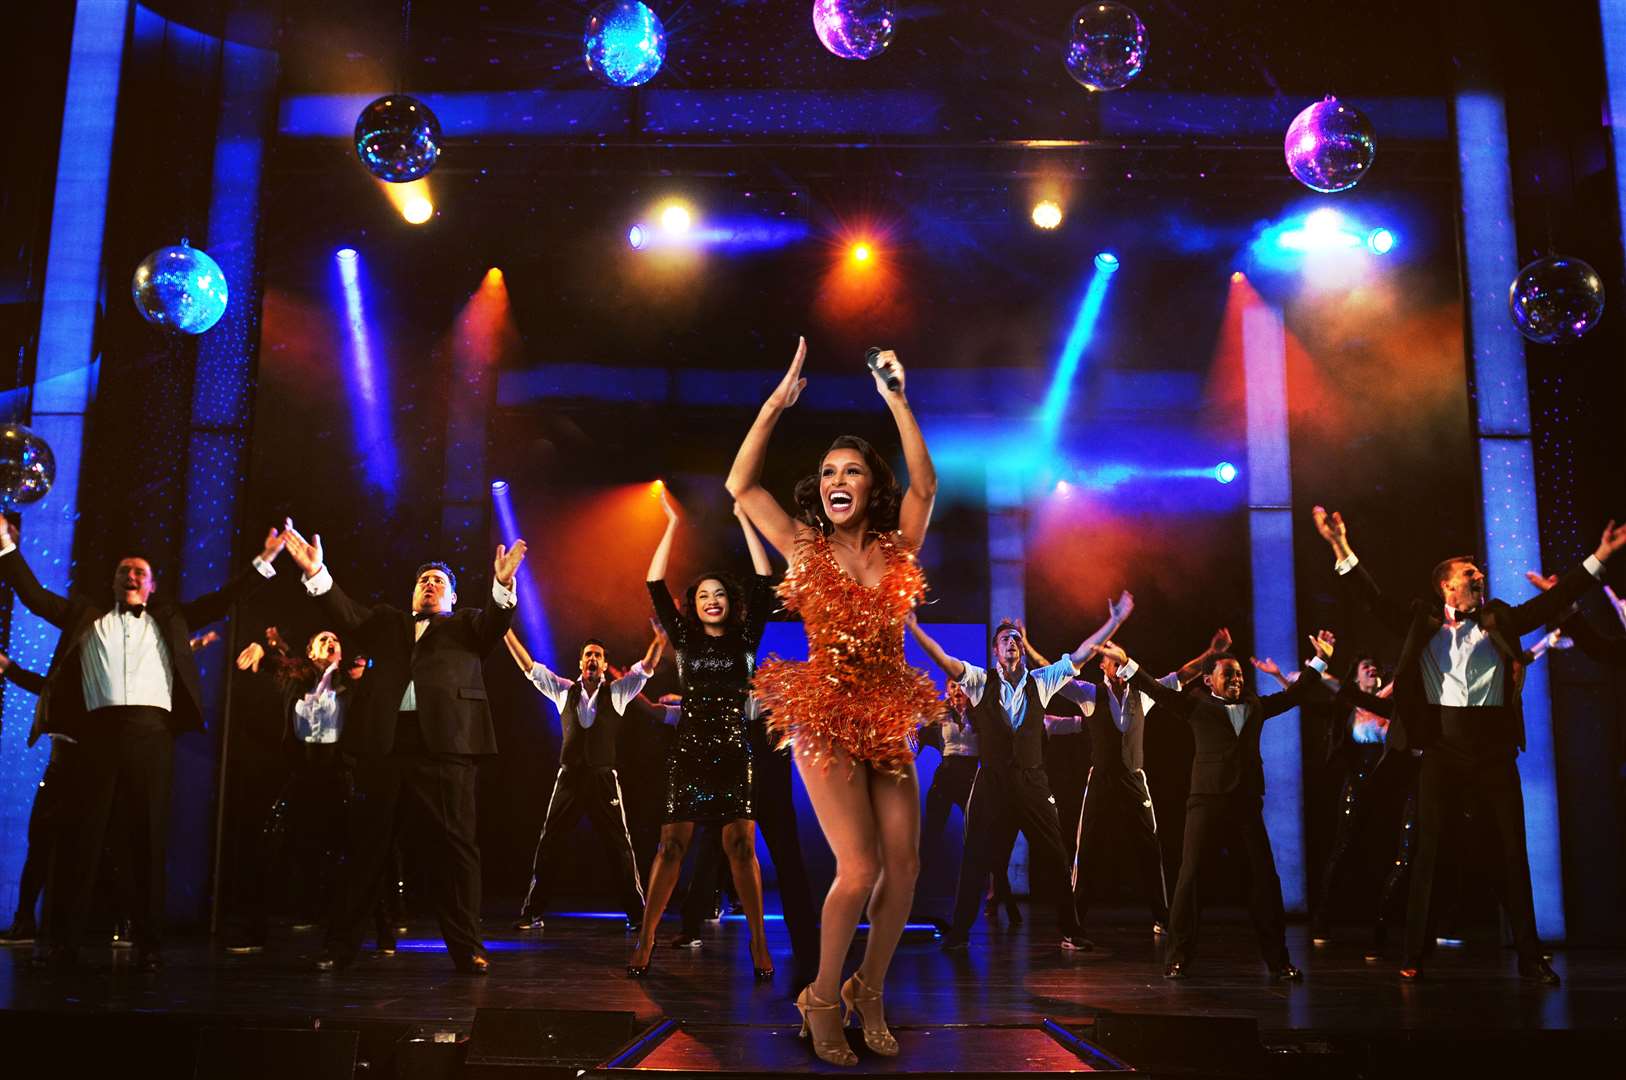 The Bodyguard musical is touring across the country; trouble started due to loud singing by audience members at the show in Manchester. Picture: Matt Crockett